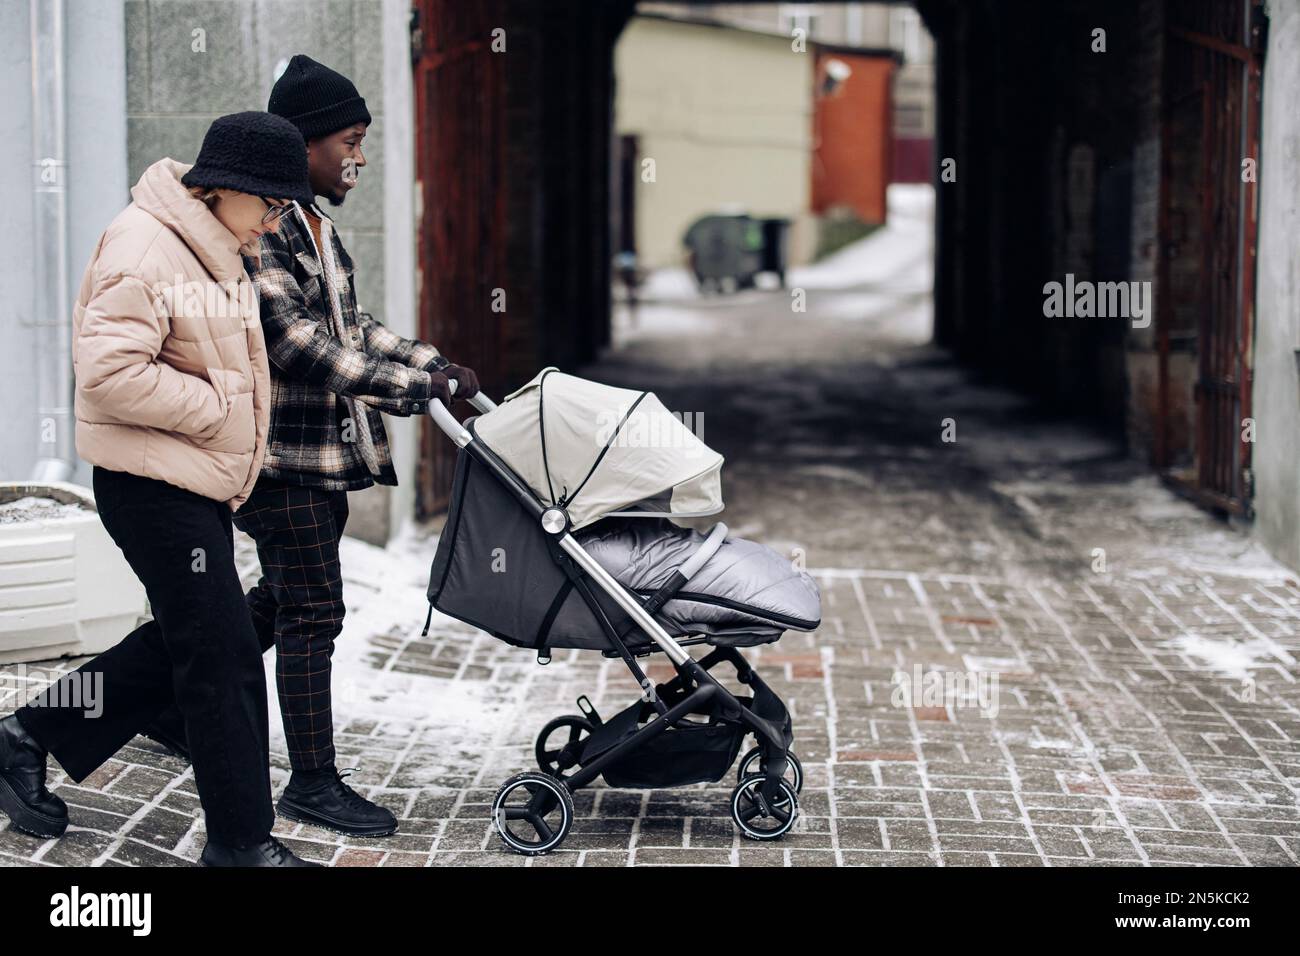 Happy interracial family walk on street and push baby carriage. Concept of interracial family and unity between different human races. Stock Photo